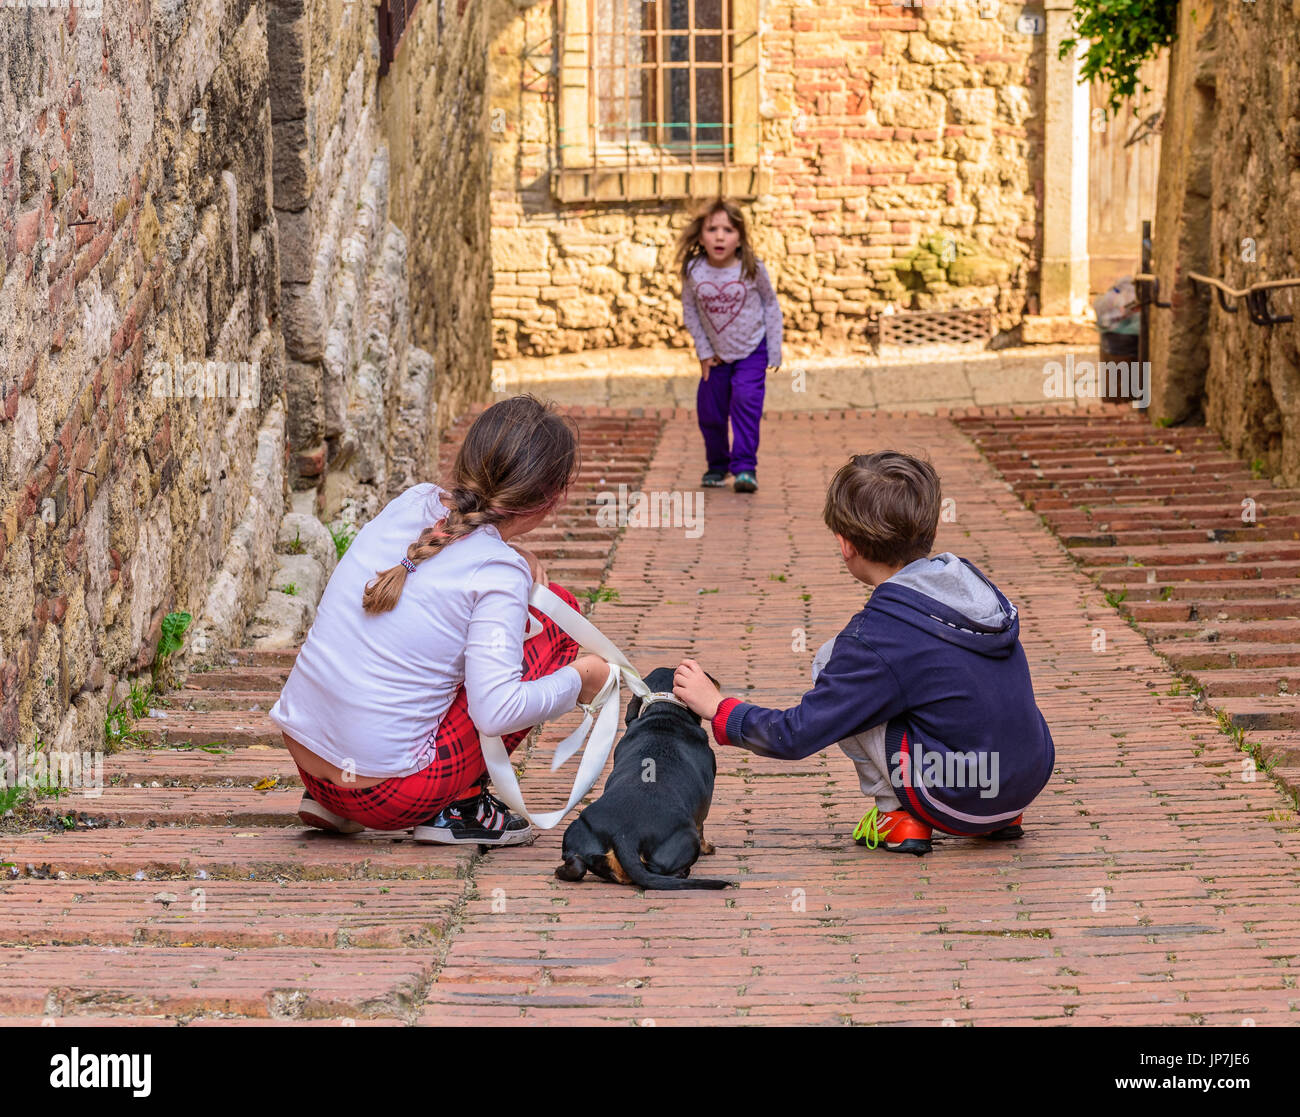 COLLE VAL D'ELSA, ITALY - APRIL 25, 2017 - Two kids play with a puppy dog in an alley of Colle Val d'Elsa. Stock Photo